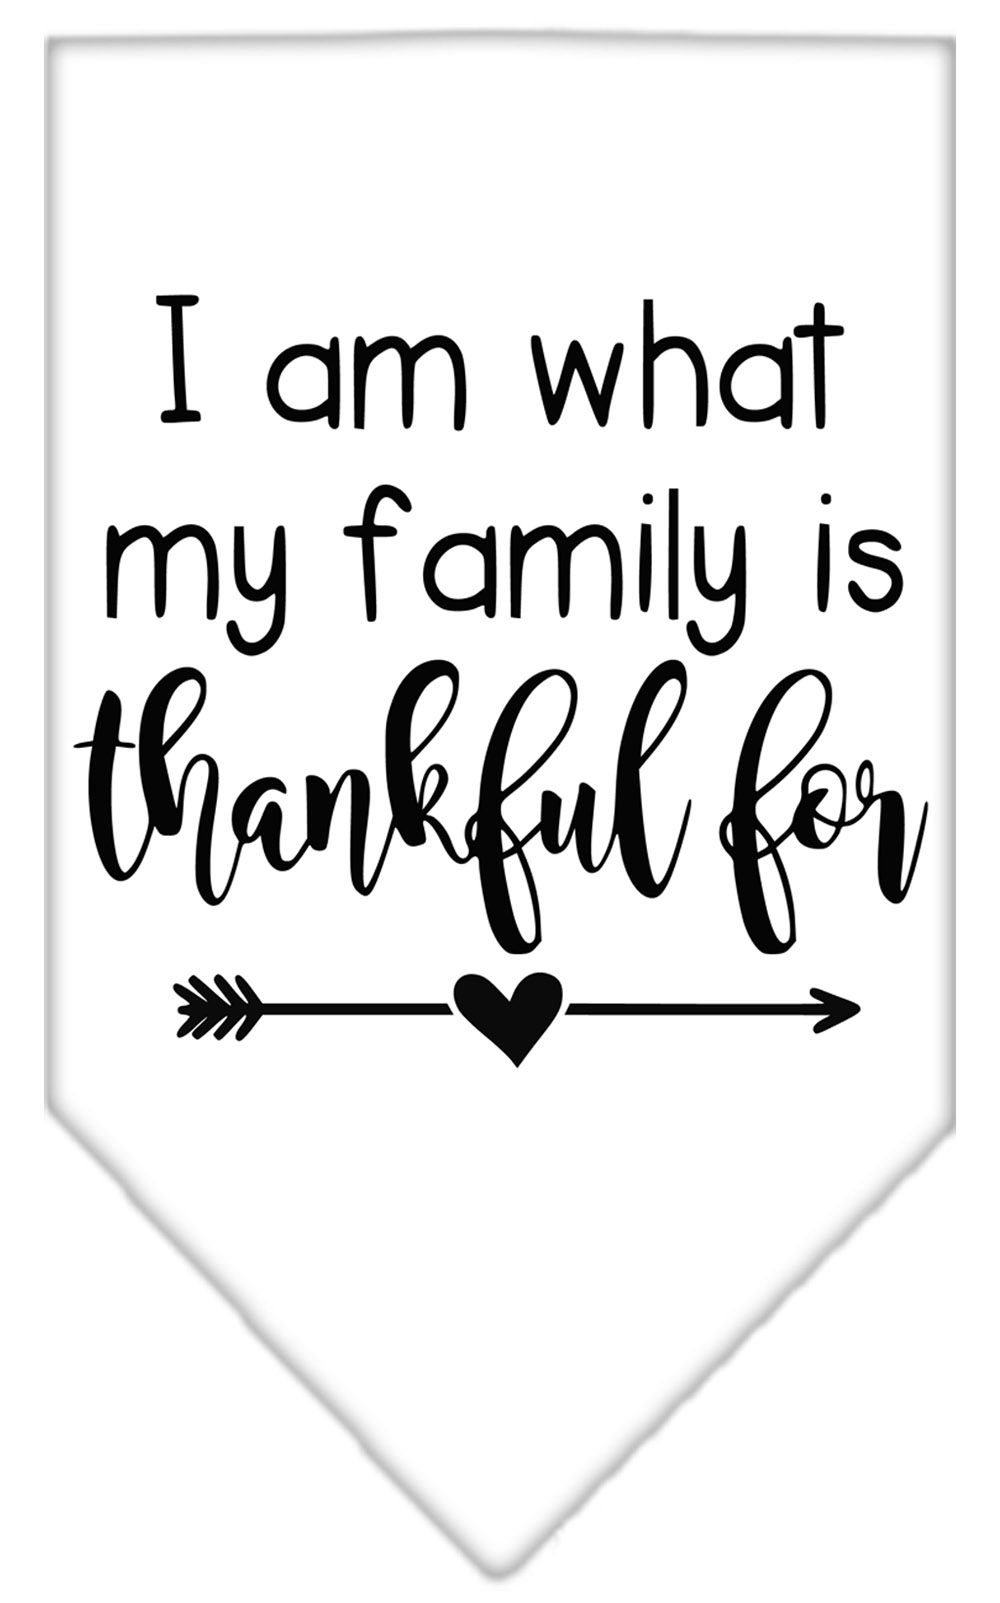 I Am What My Family is Thankful For Screen Print Bandana White Small